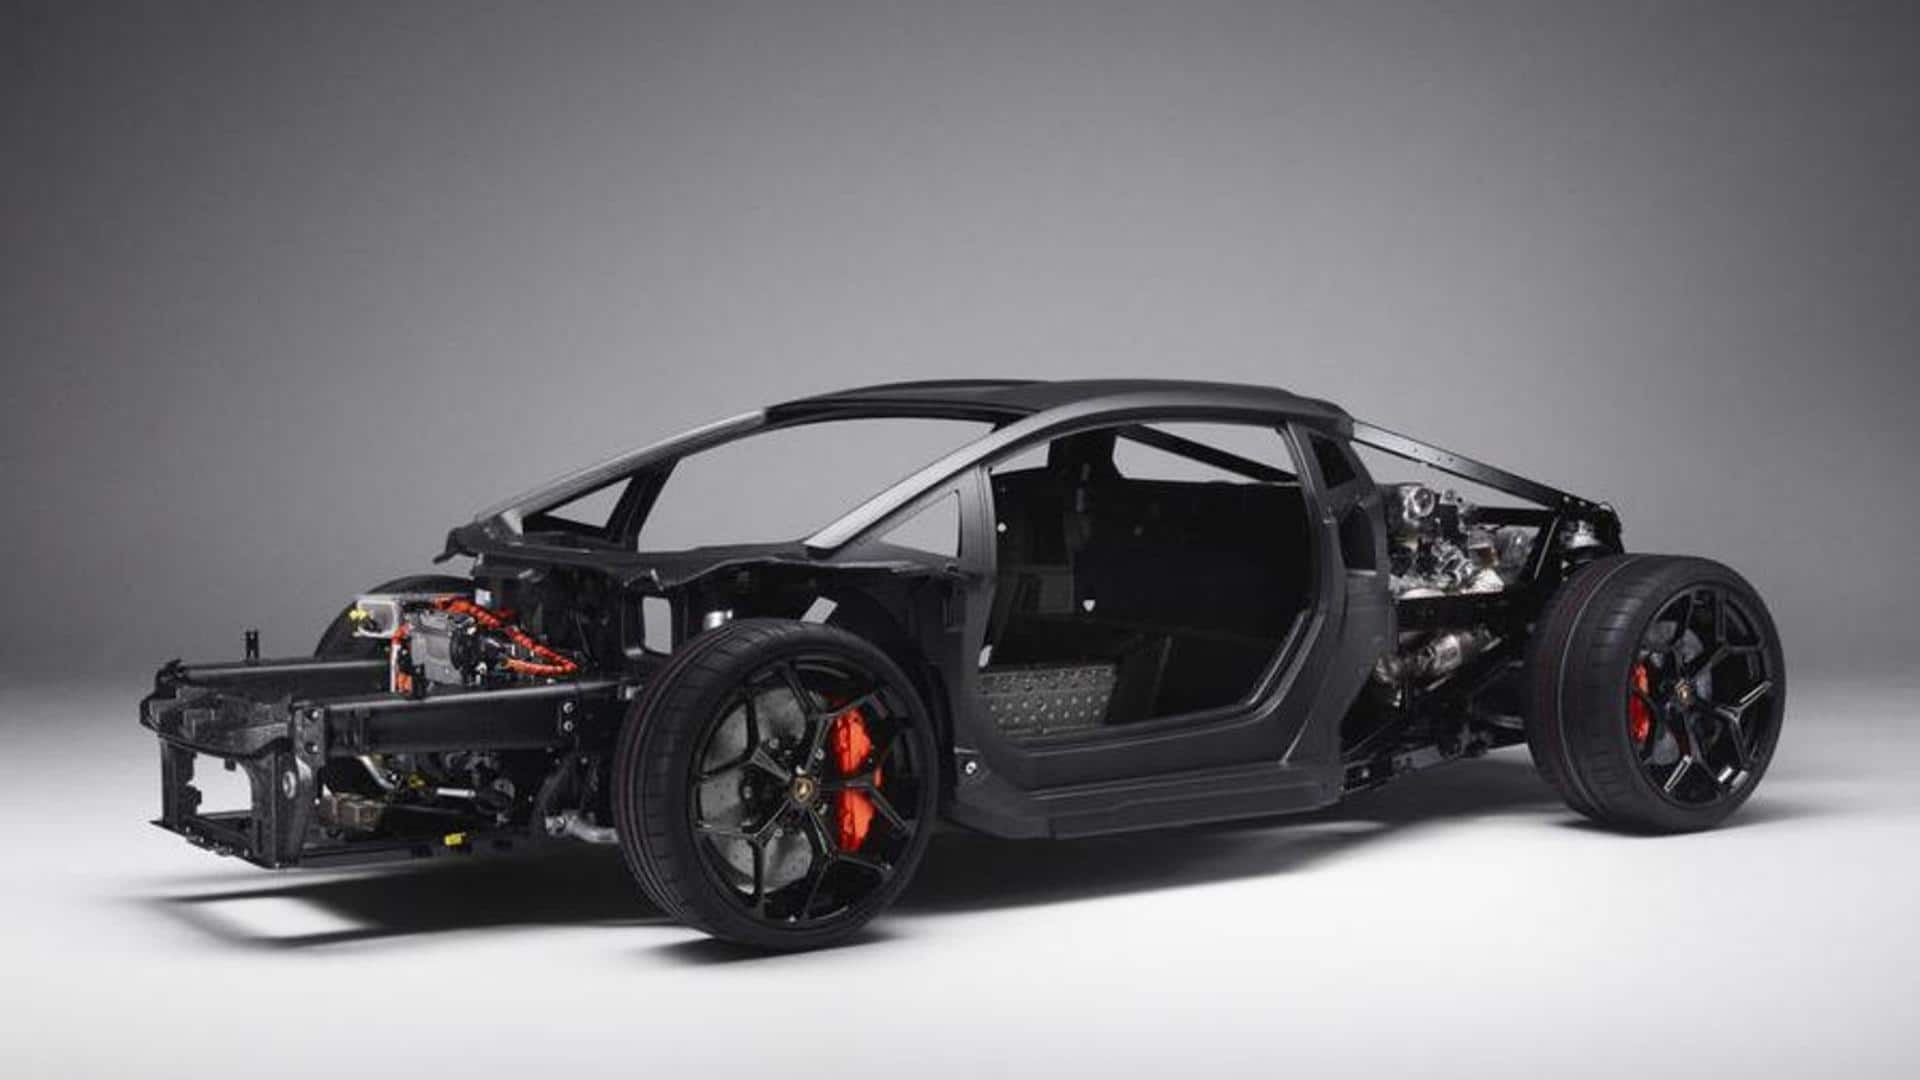 What's special about Lamborghini's new 'monofuselage' chassis for upcoming PHEV